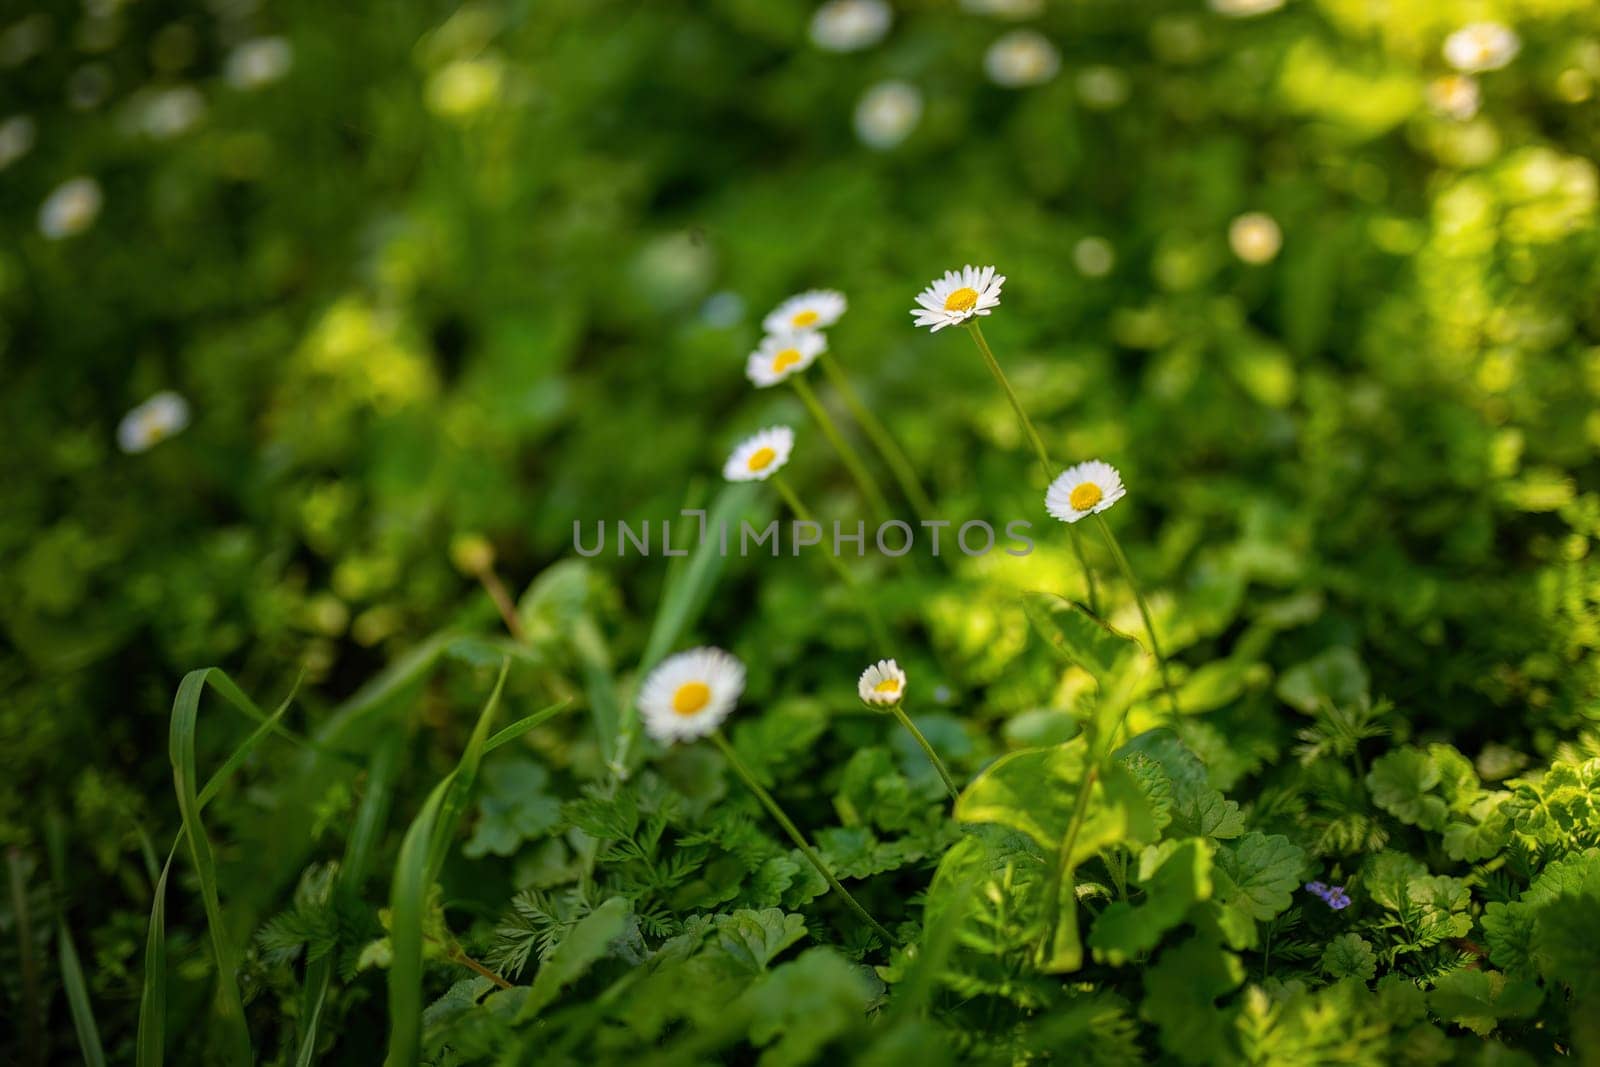 Daisies Growing in Grass by pippocarlot